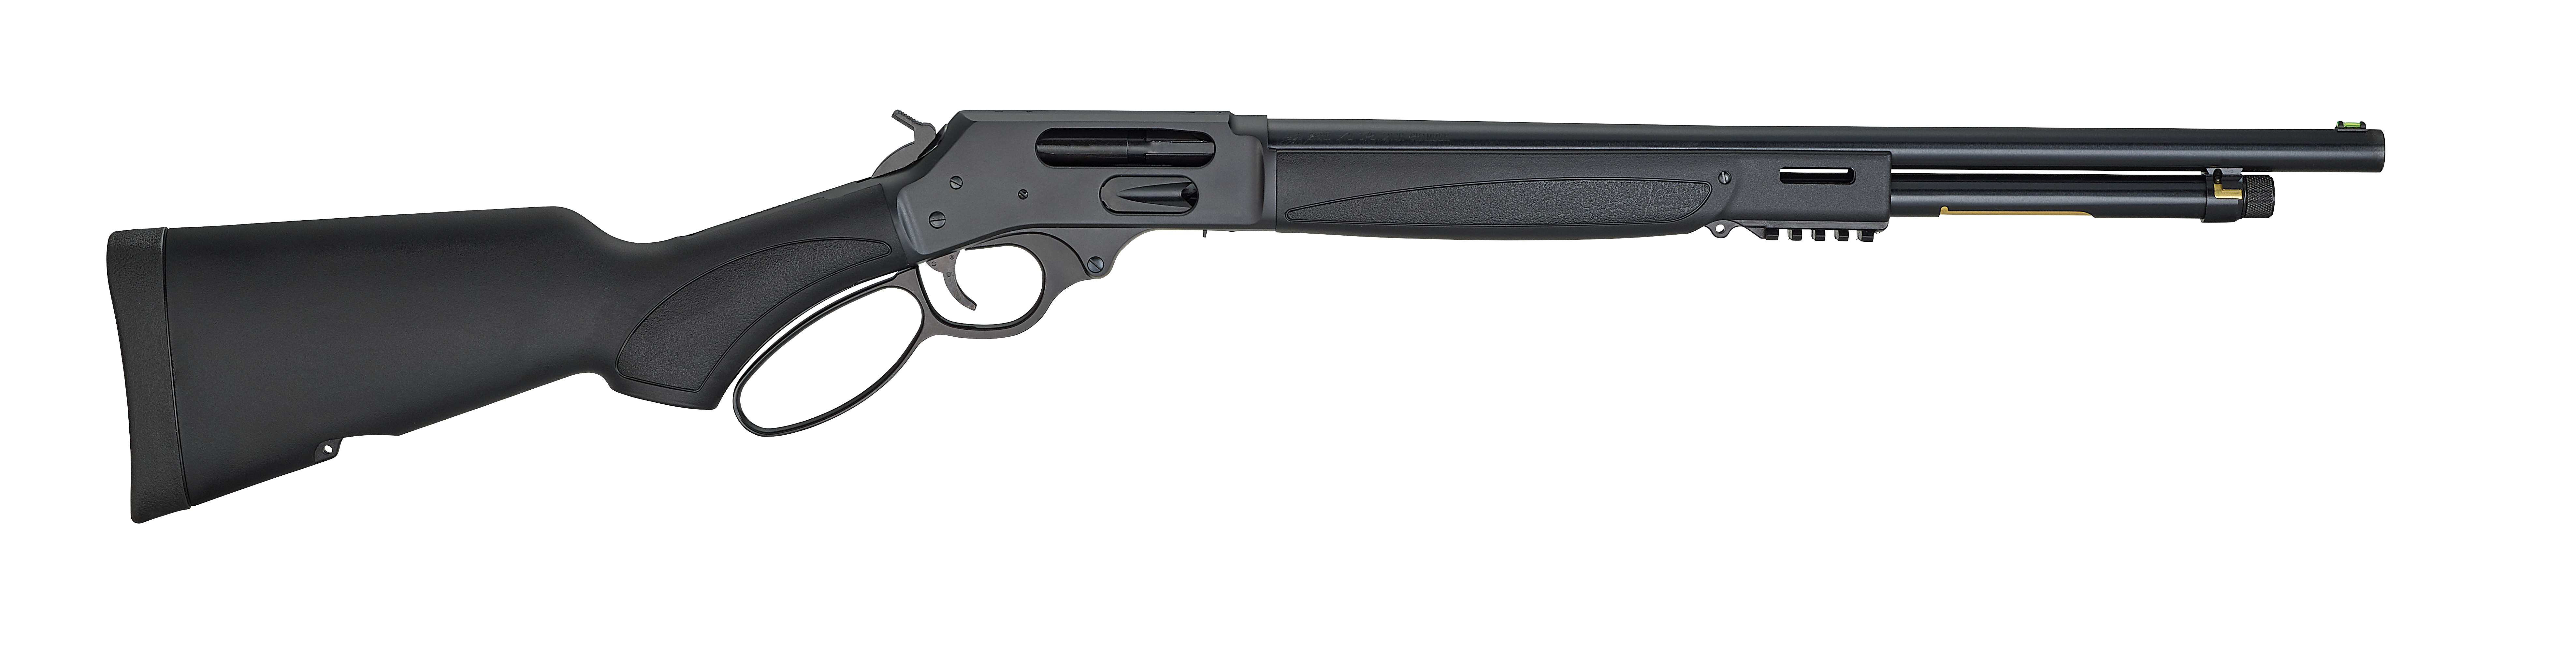 A lever-action type of shotgun.